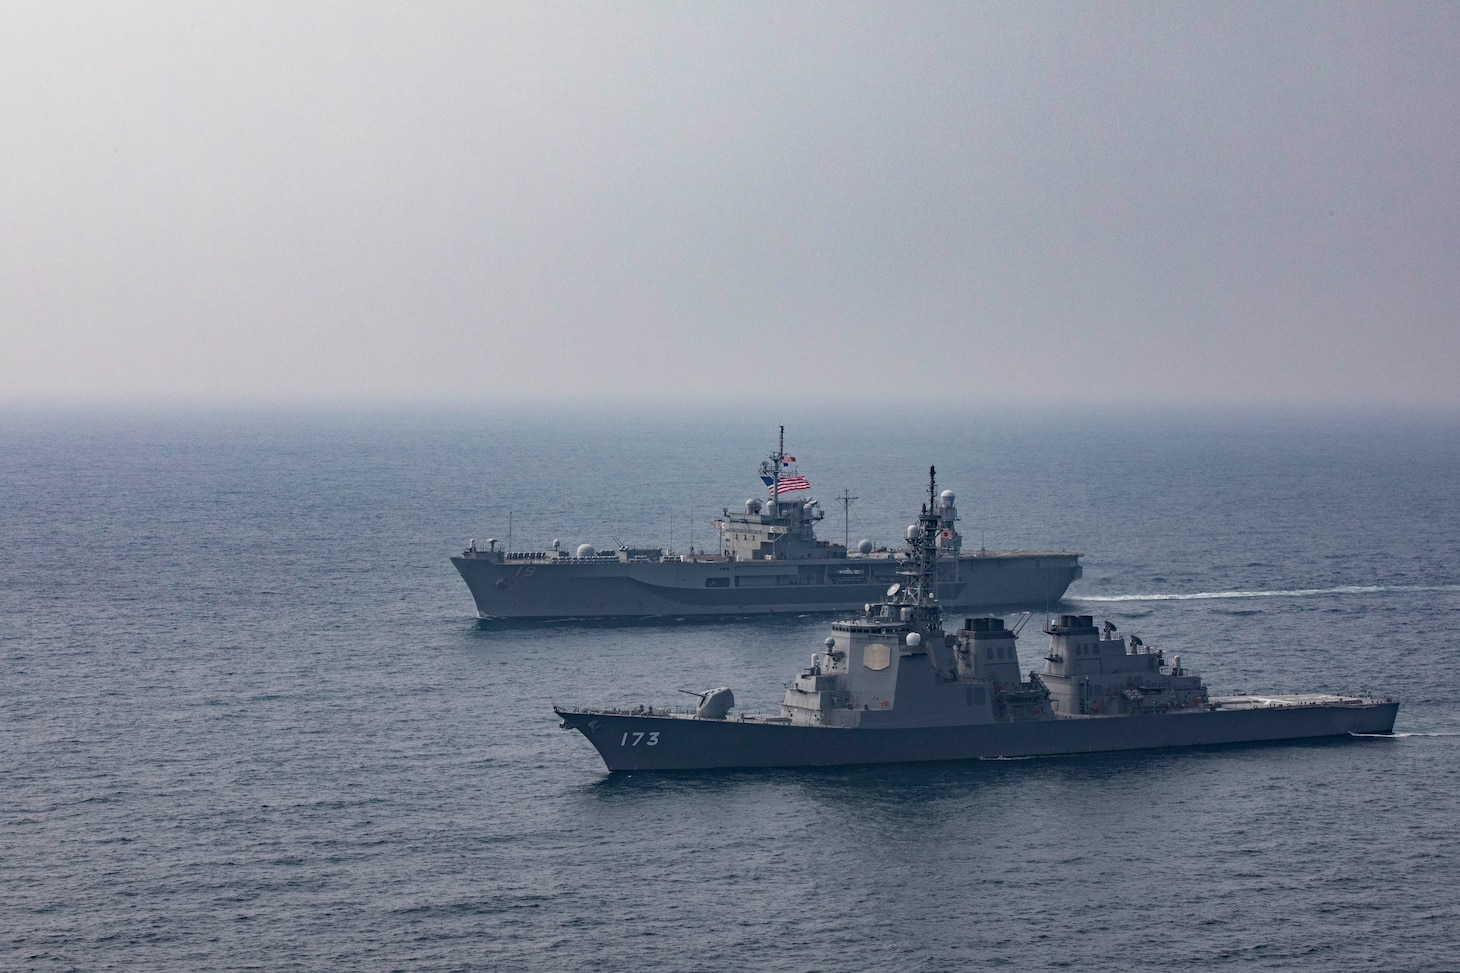 U.S. 7th Fleet flagship USS Blue Ridge (LCC 19) conducts a bilateral exercise with Japan Maritime Self-Defense Force (JMSDF) guided-missile destroyer JS Kongo (DDG-173) March 29, 2021 in the East China Sea. These types of operations provide an opportunity for each partner nation to share their unique capabilities in shipboard maneuvering procedures, maritime skills and interoperability. Blue Ridge is the oldest operational ship in the Navy and, as 7th Fleet command ship, actively works to foster relationships with allies and partners in the Indo-Pacific region.